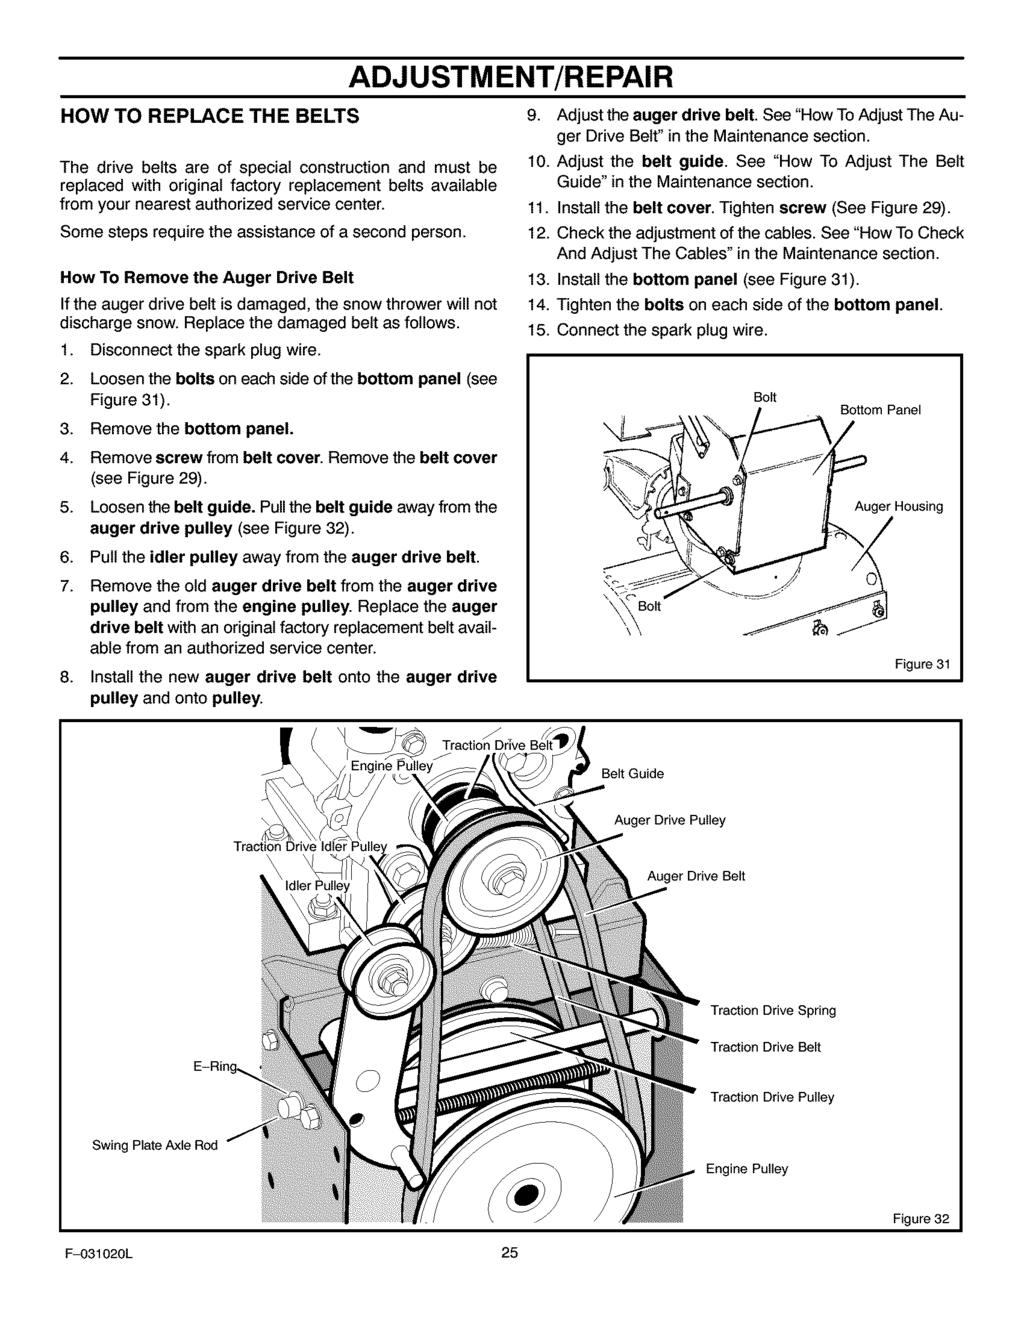 ADJUSTMENT/REPAIR HOW TO REPLACE THE BELTS 9. Adjust the auger drive belt. See "How To Adjust The Auger Drive Belt" in the Maintenance section.